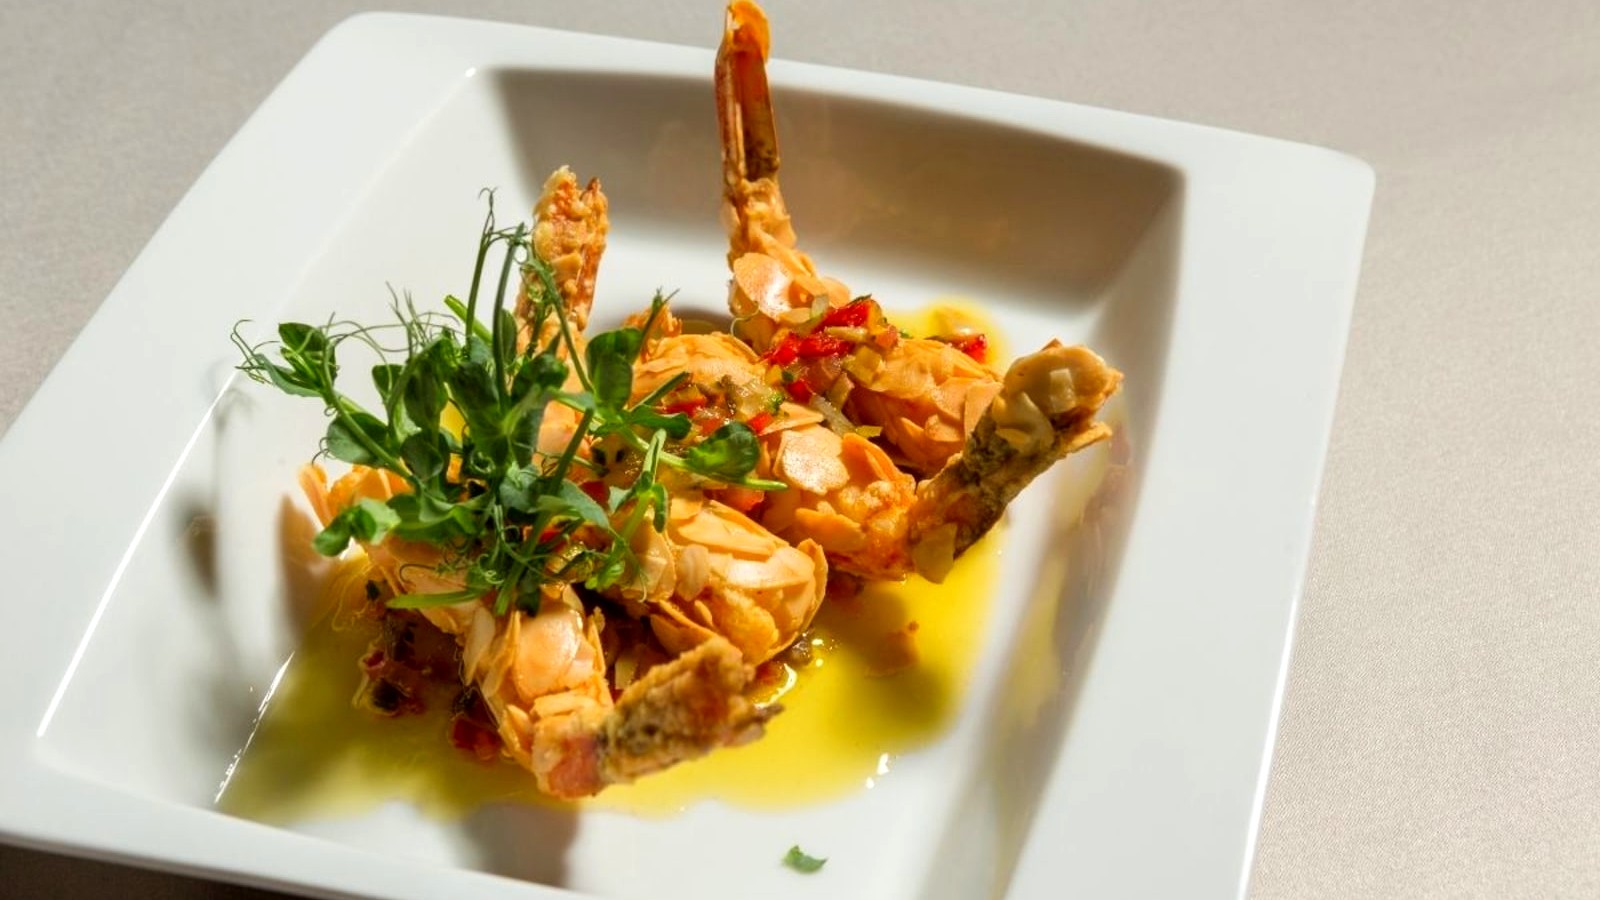 Image of Sauteed Shrimp In Almond Flour Crust With Sweet And Hot Chilis